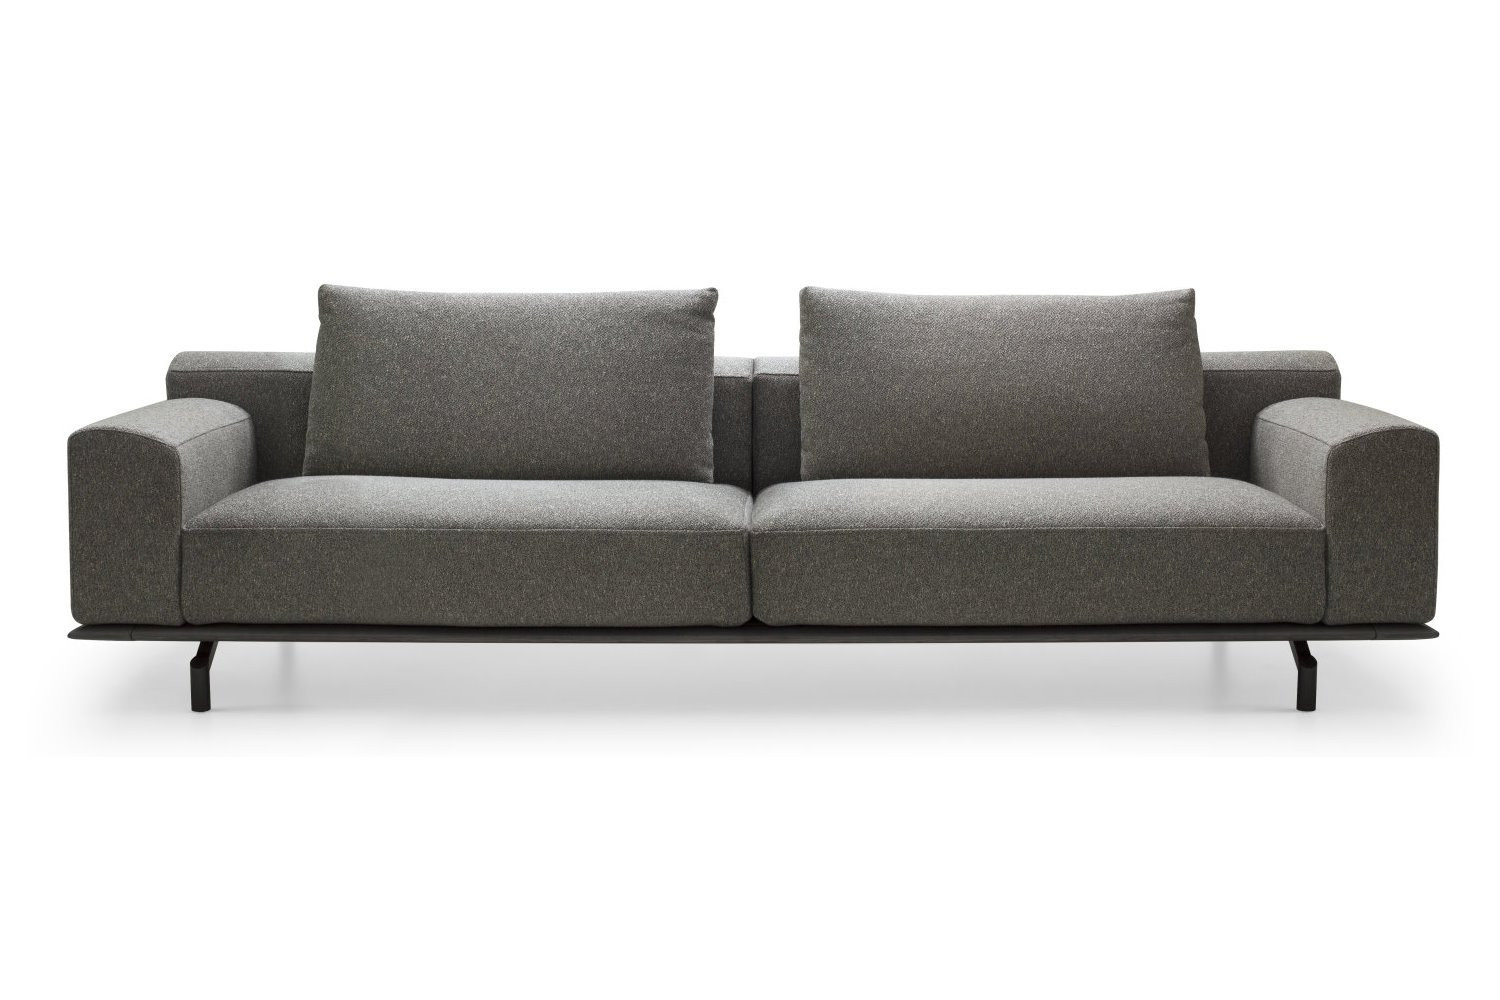 Modular sofa with removable fabric cover Fly